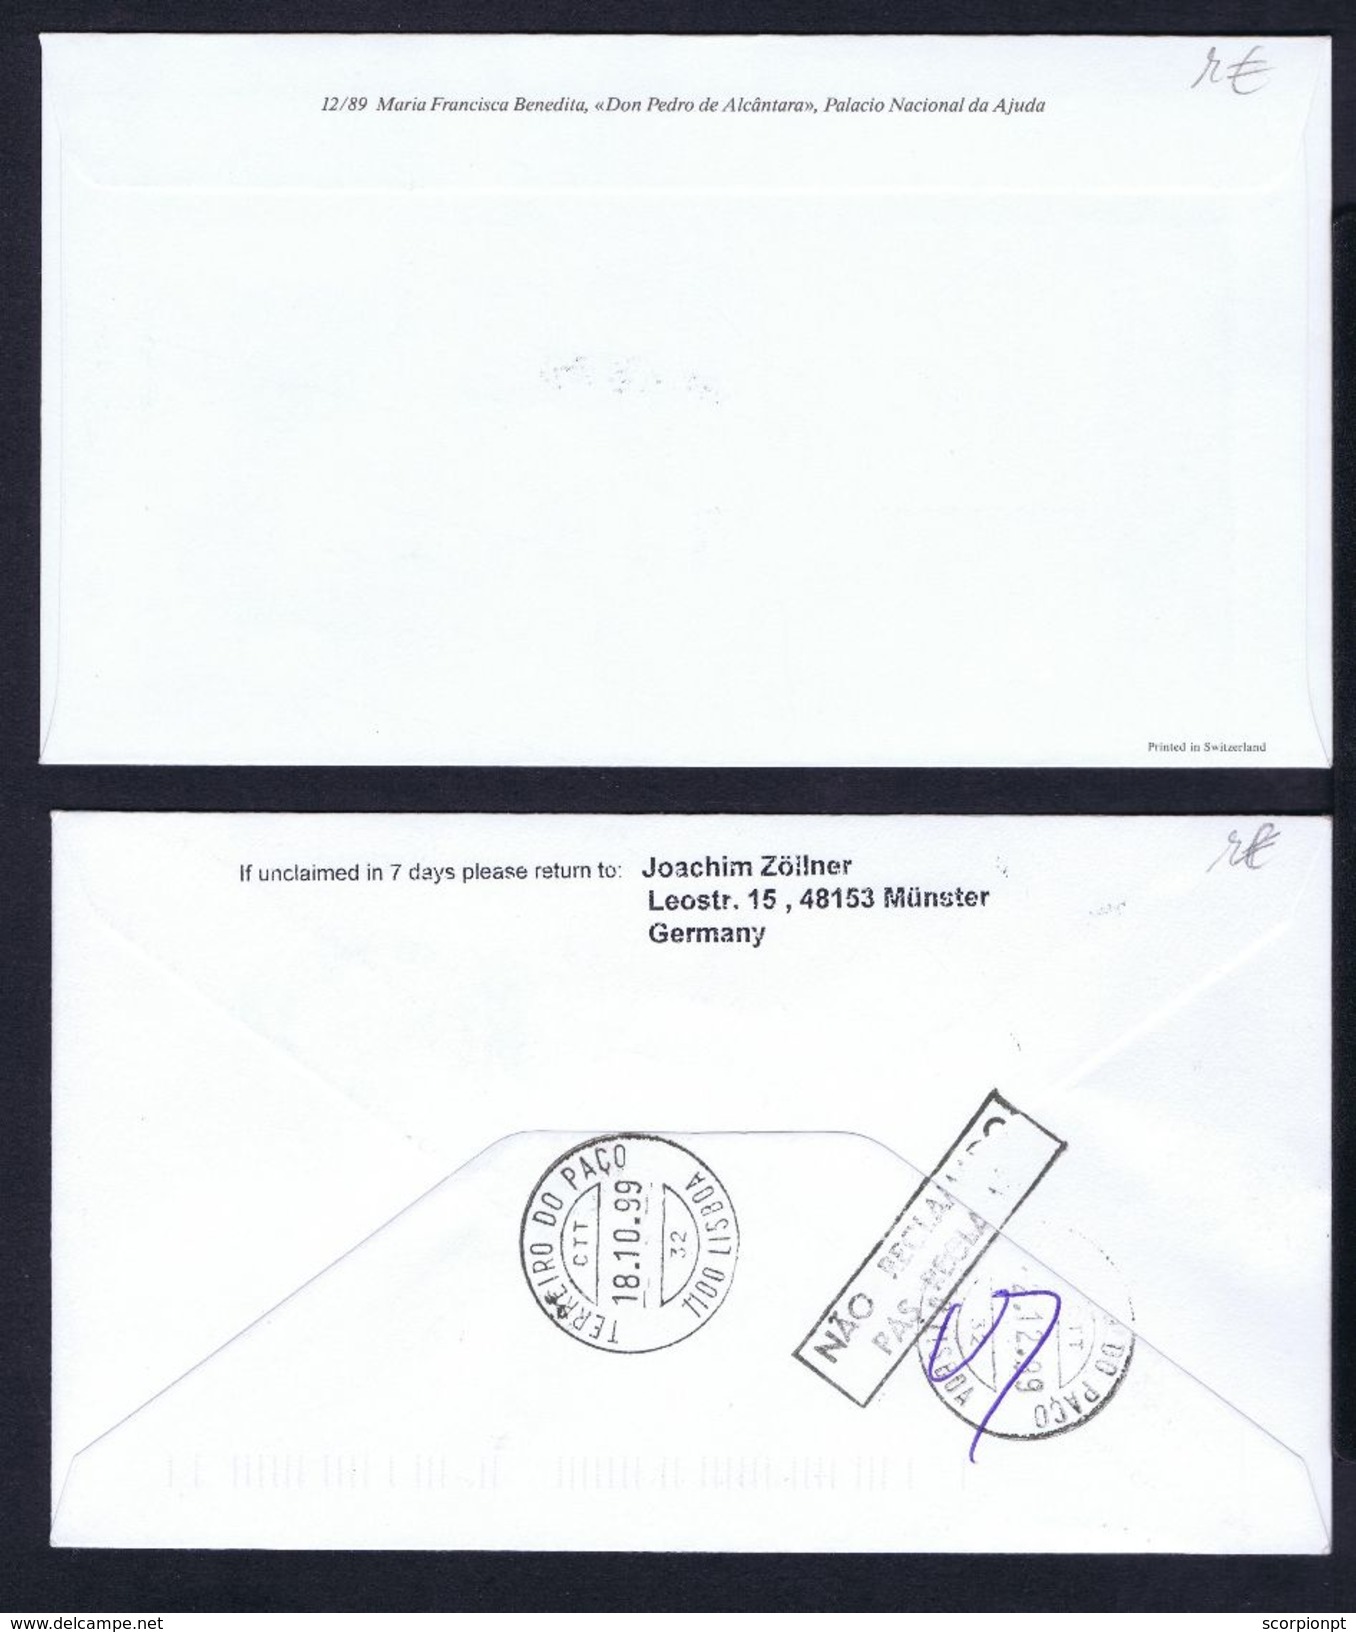 Sp4966 NATIONS UNIS UNICEF Architecture Arts Flags Fdc UNITED NATIONS NY Drapeaux 1989+1999 PORTUGAL (3 Itens) - Lettres & Documents